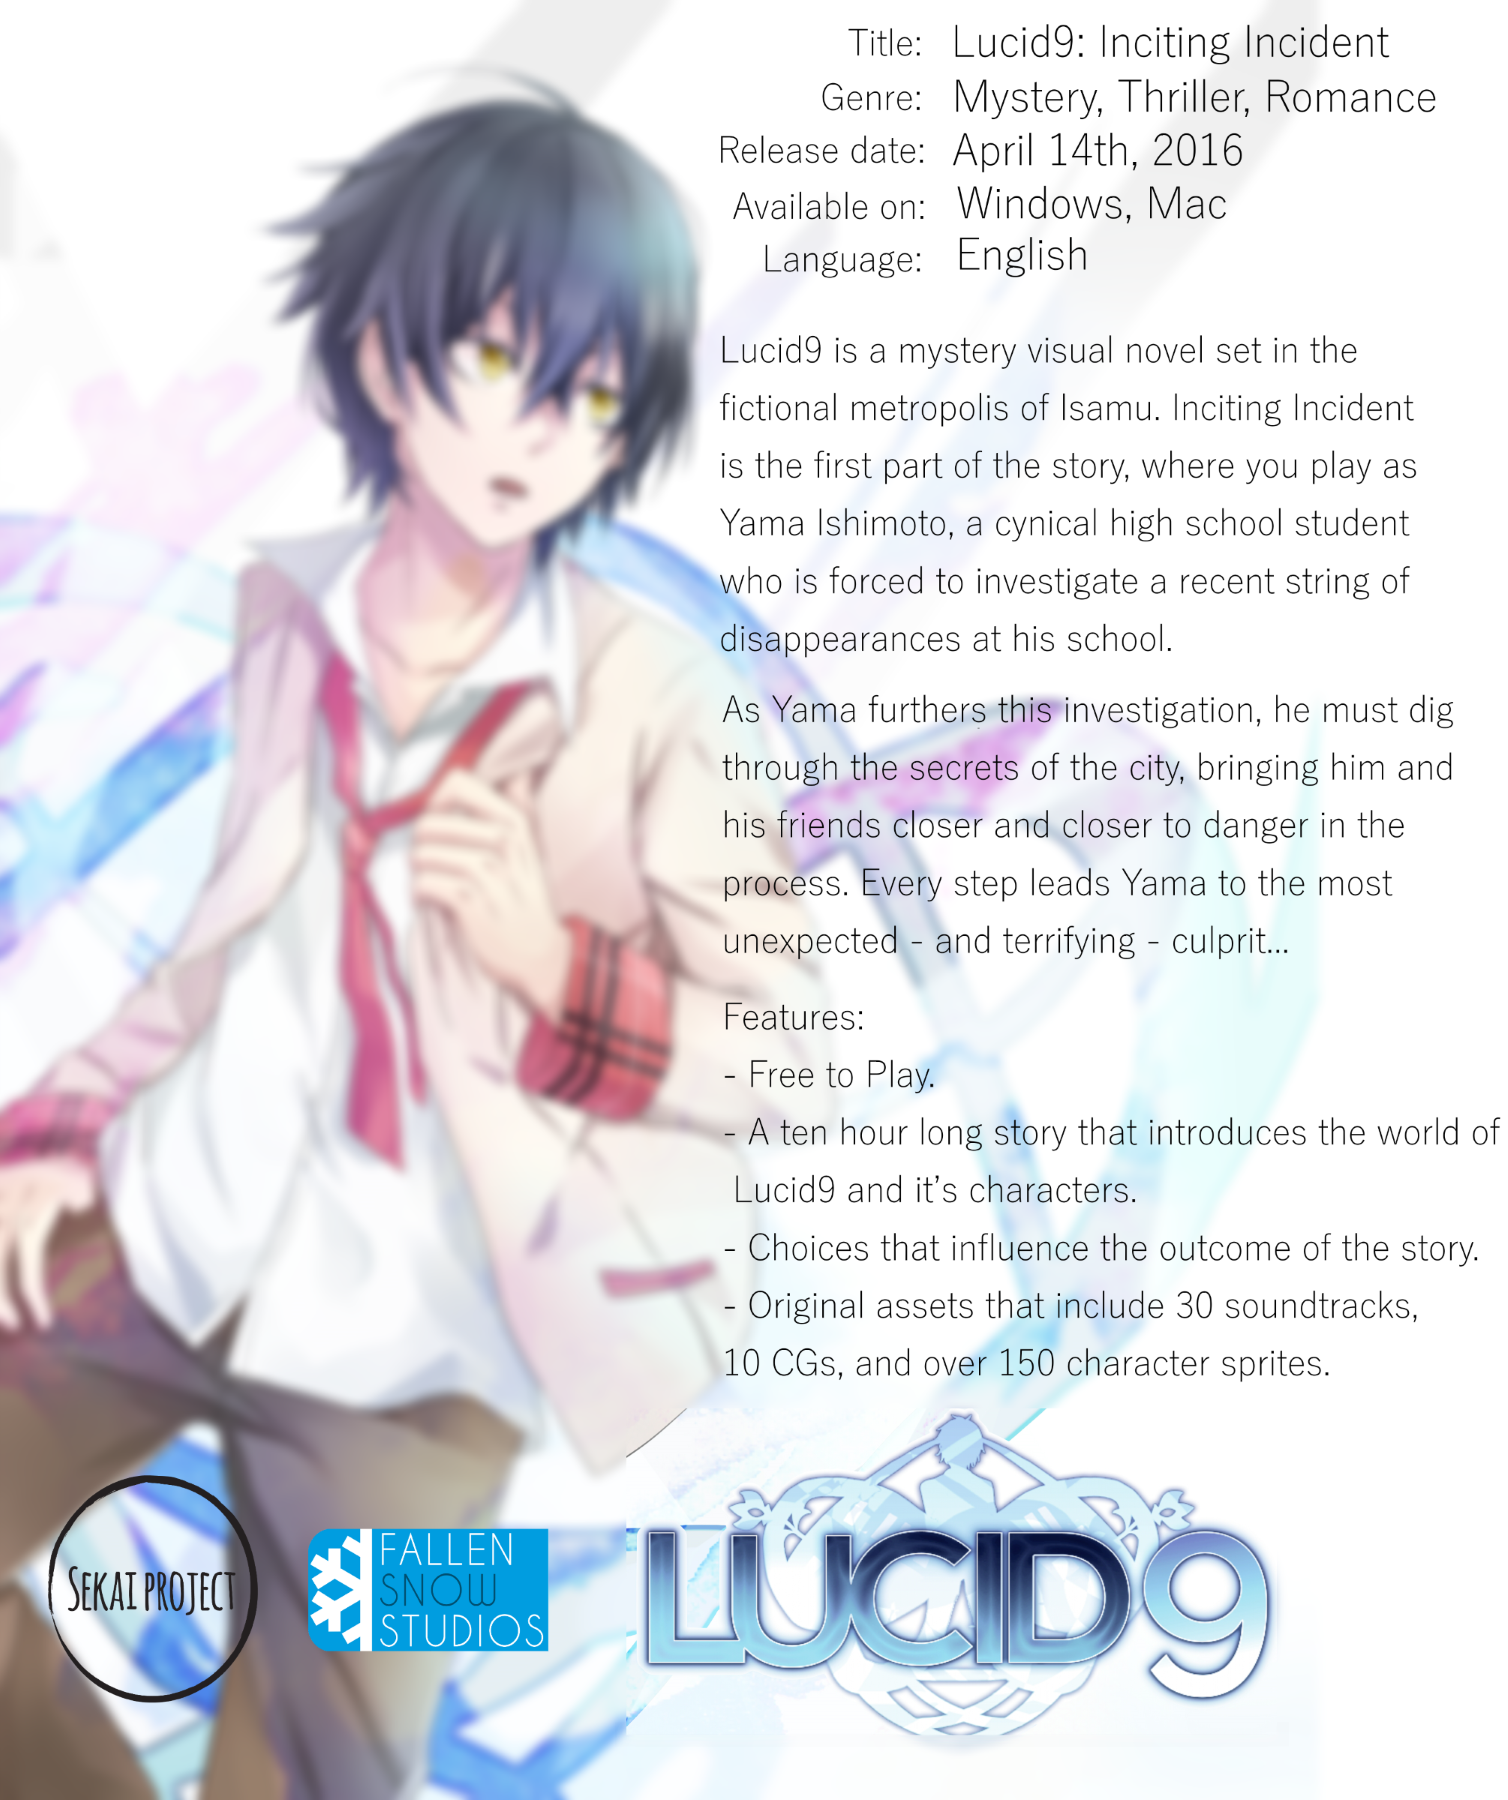 [VN] Lucid9: Inciting Incident available for free